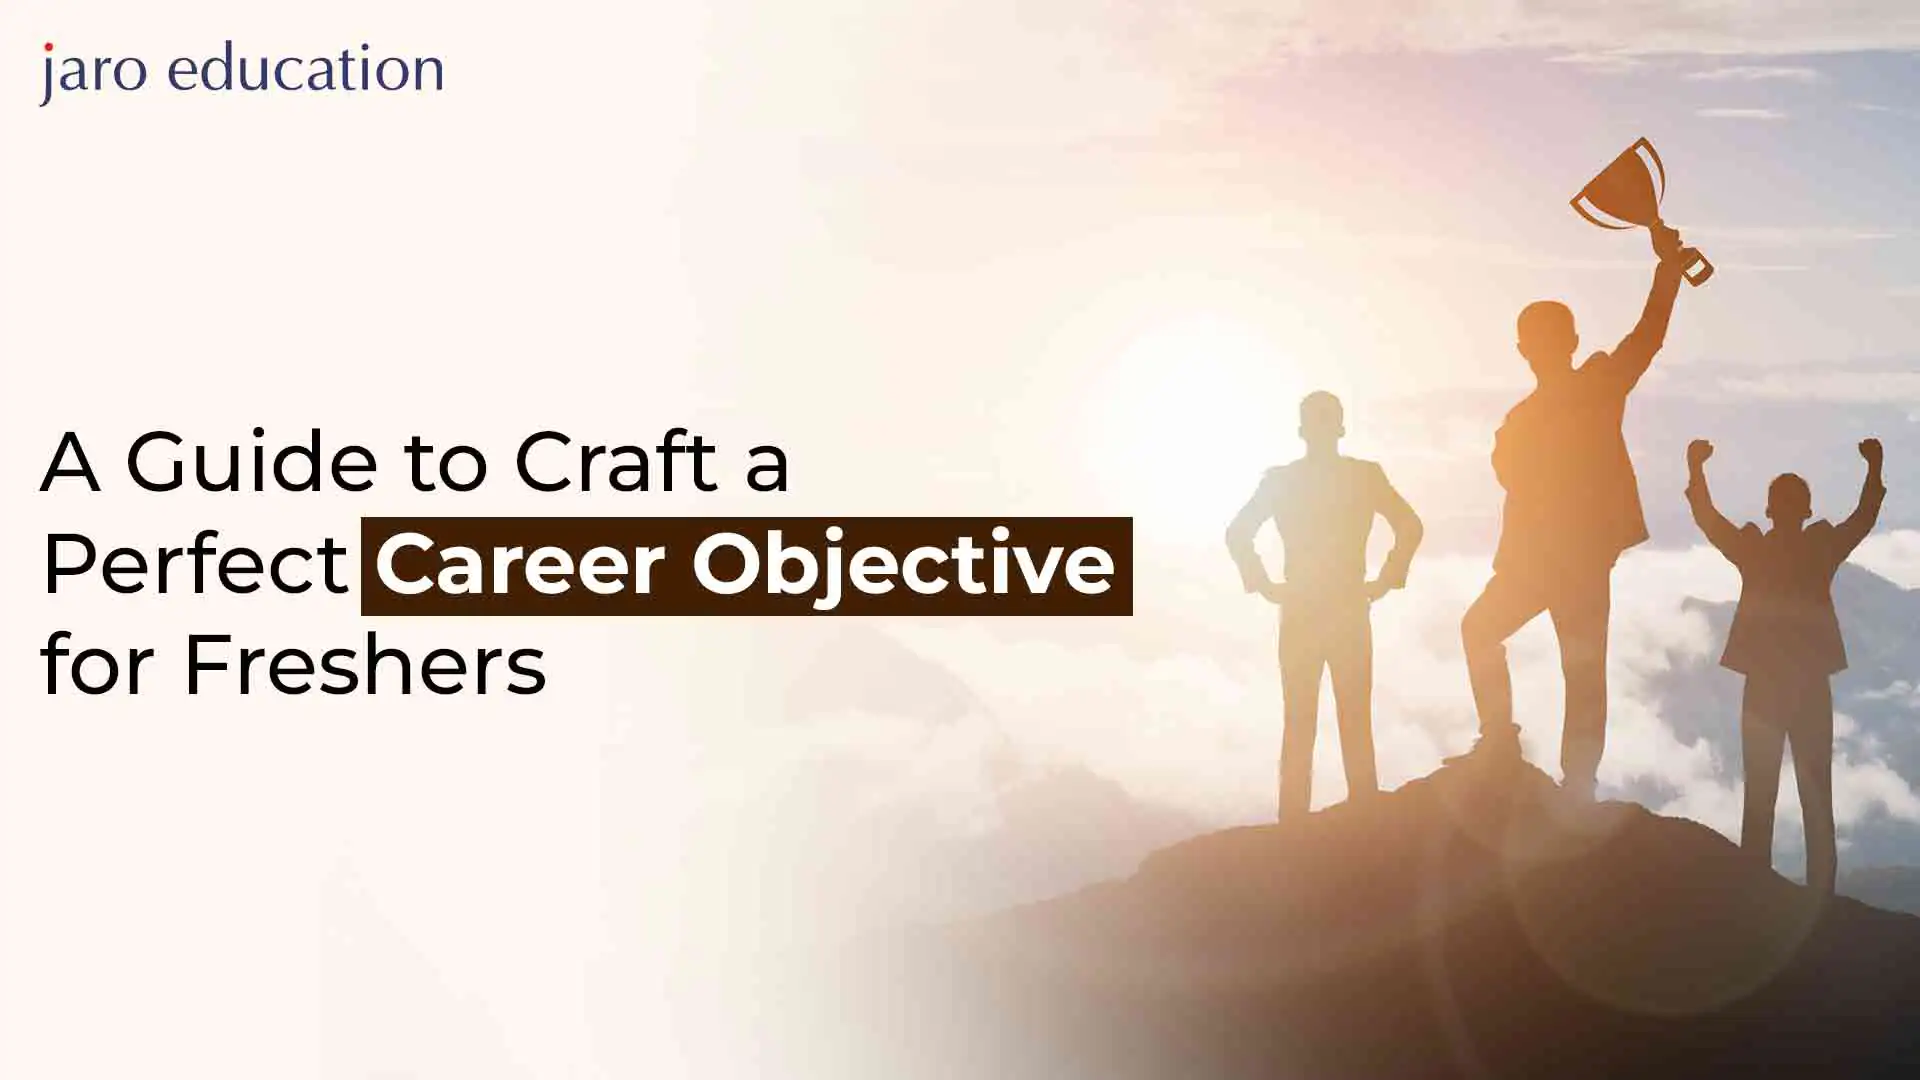 A-Guide-to-Craft-a-Perfect-Career-Objective-for-Freshers